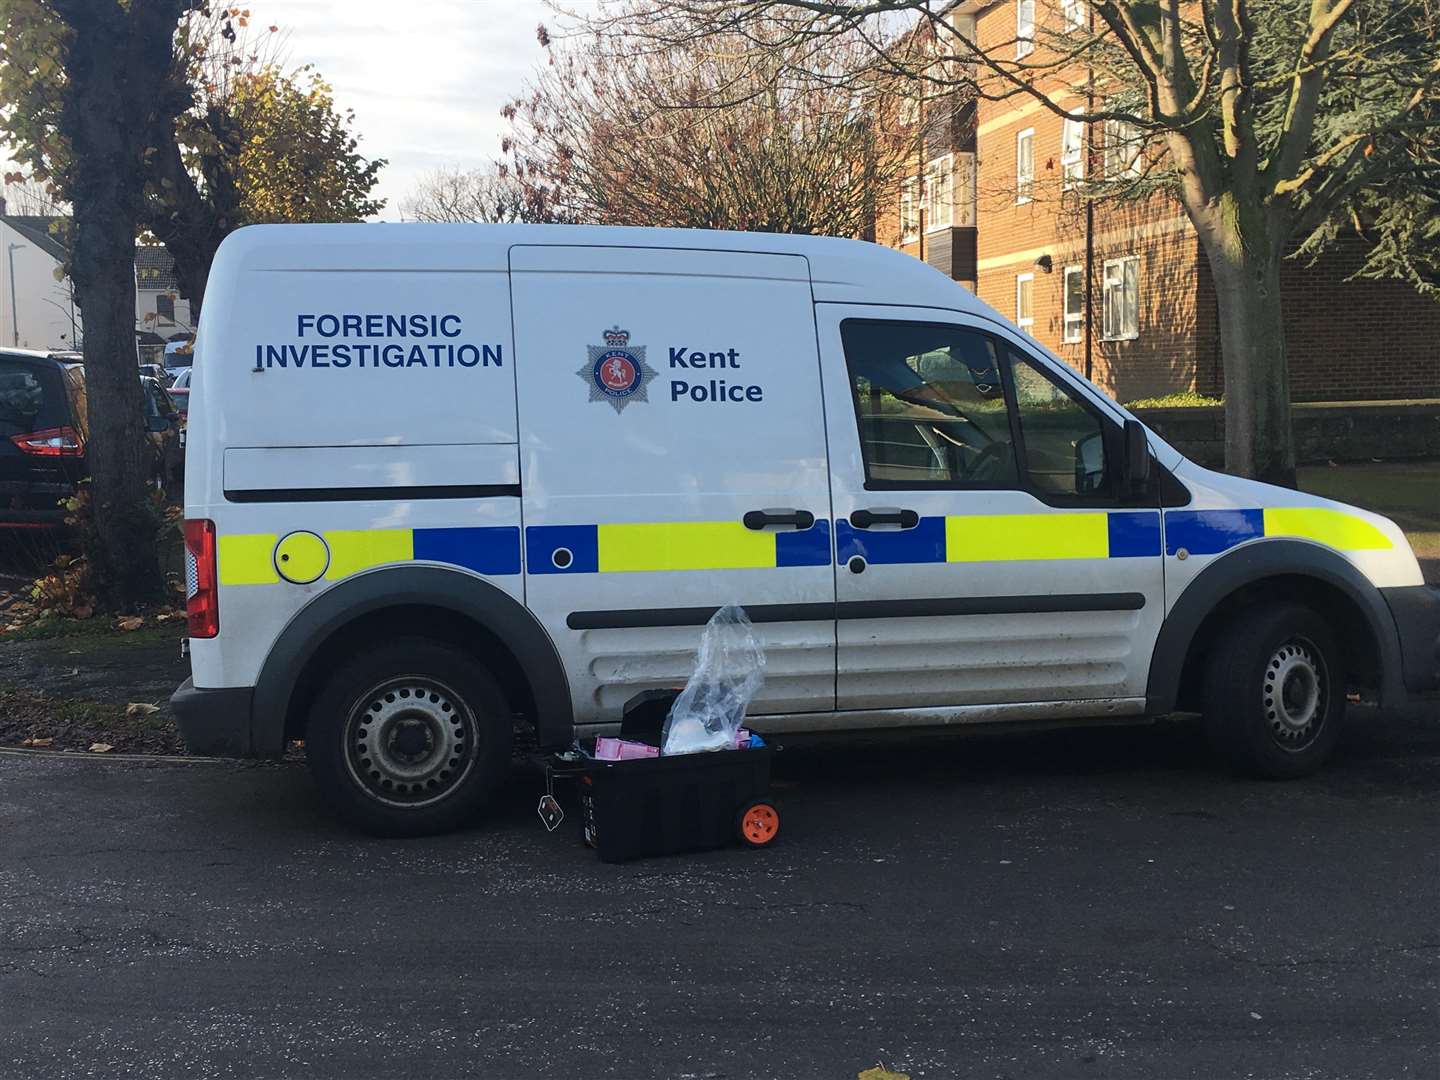 Forensic teams are carrying out investigations